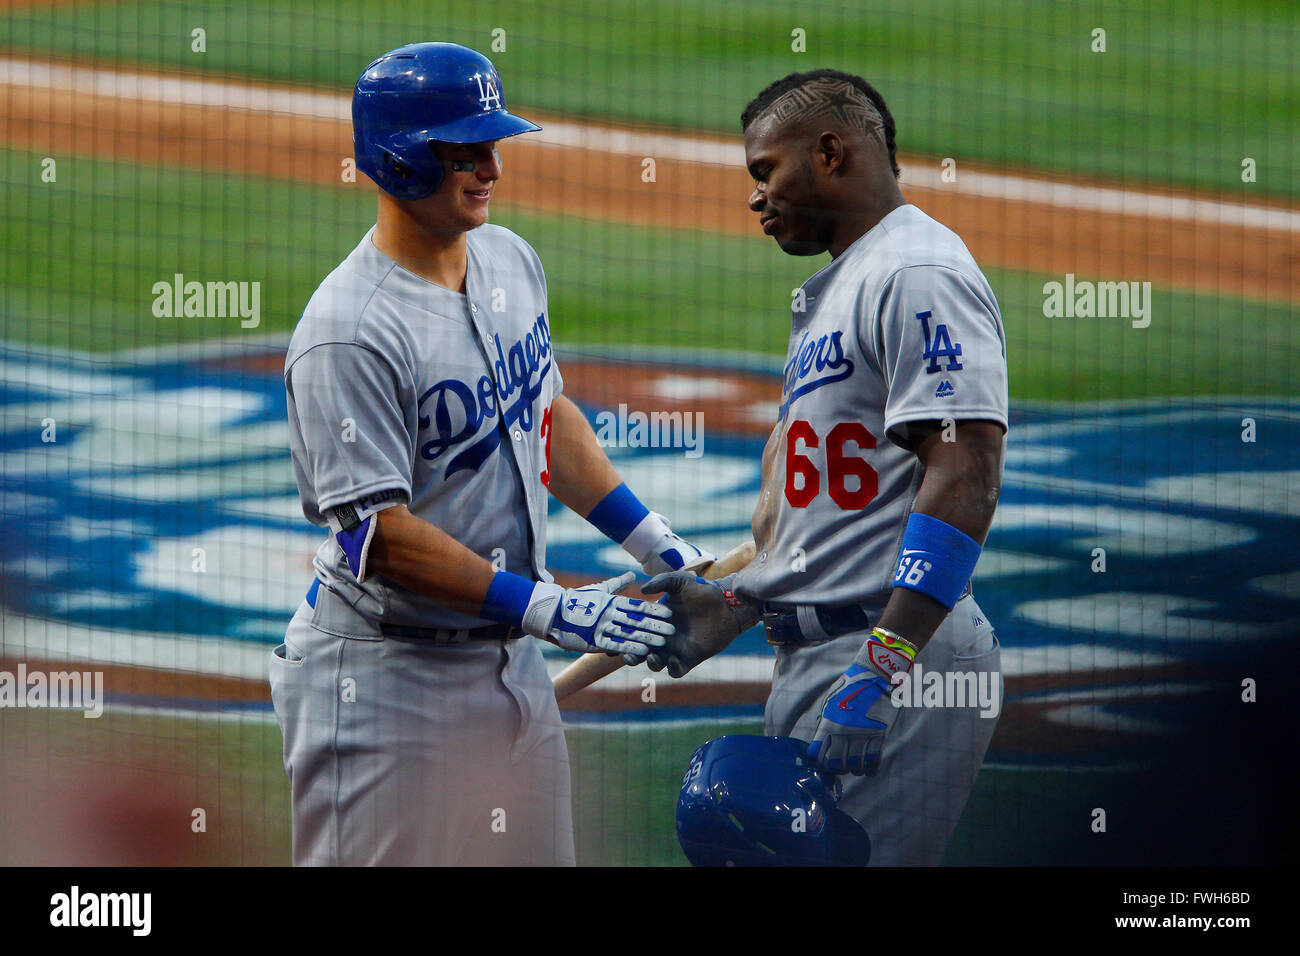 San Diego, CA, USA. 4th Apr, 2016. SAN DIEGO, CA, USA -- APRIL 4, 2016: .|.PADRES vs. DODGERS.Dodgers Yasiel Puig hits triple, then advances to score on a throwing error by Padres Cory Spangenberg. He is greeted by teammate Joc Pederson.|.Mandatory Credit: PHOTO BY NELVIN C. CEPEDA, SAN DIEGO UNION-TRIBUNE © Nelvin C. Cepeda/U-T San Diego/ZUMA Wire/Alamy Live News Stock Photo